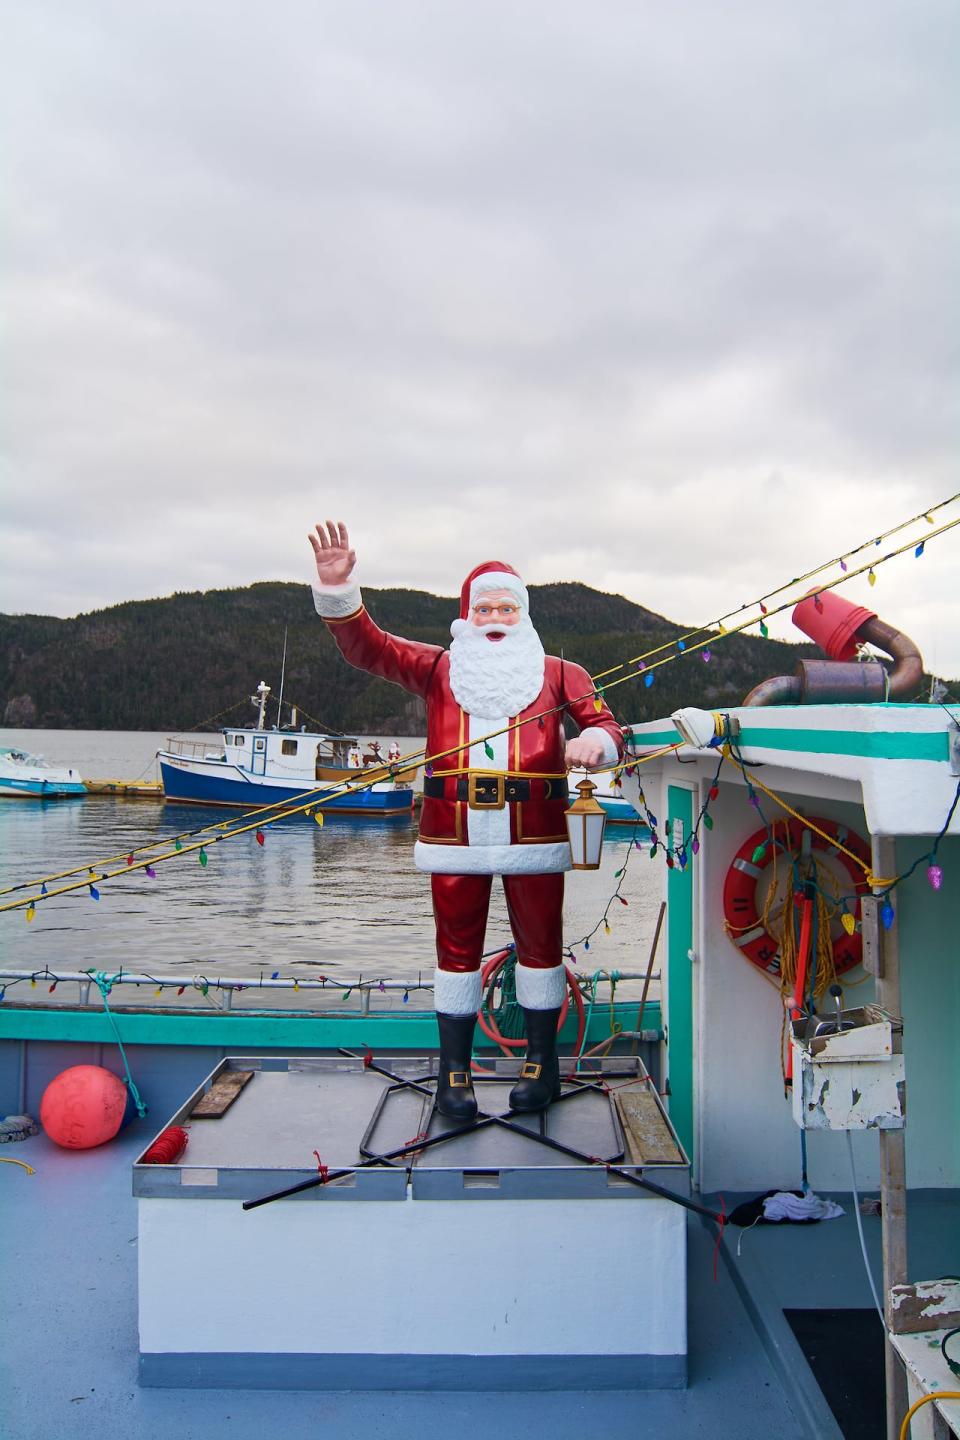 Santa stopped into Placentia Harbour to tend to the boat before hopping in his sleigh this year.